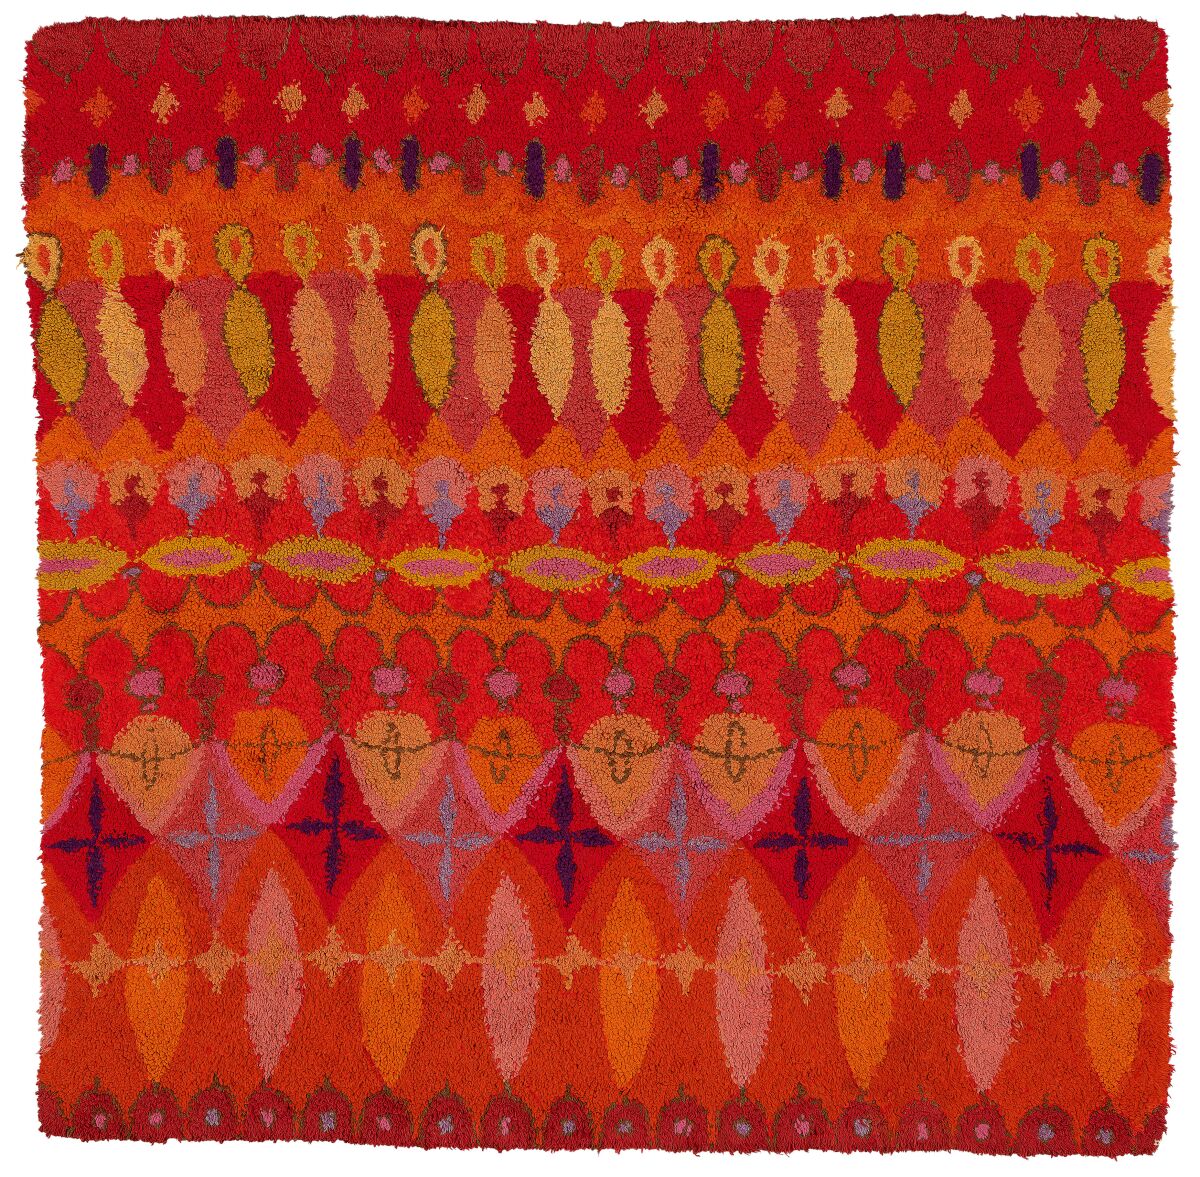 A textile by Cynthia Sargent titled "Bartok," produced around 1967 — from an exhibition that looks at how Modern artists engaged Mexican craft.